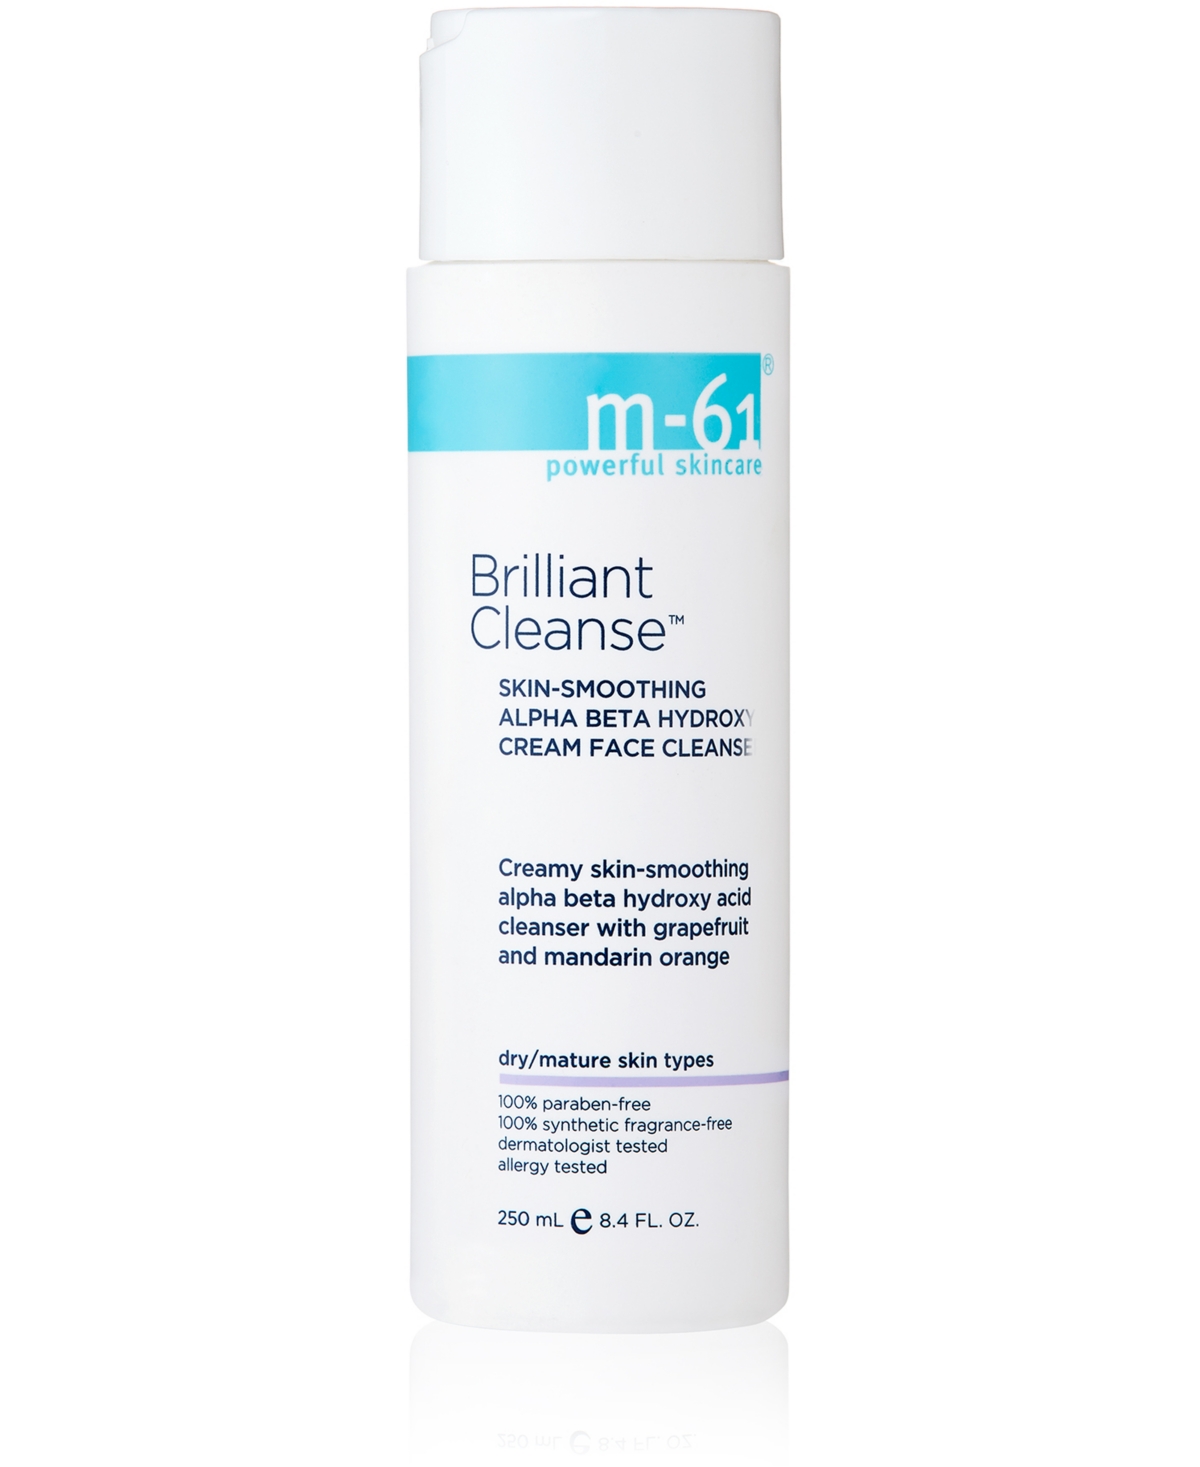 m-61 by Bluemercury Brilliant Cleanse - Skin-Smoothing Alpha Beta Hydroxy Cream Face Cleanser, 8.4 oz